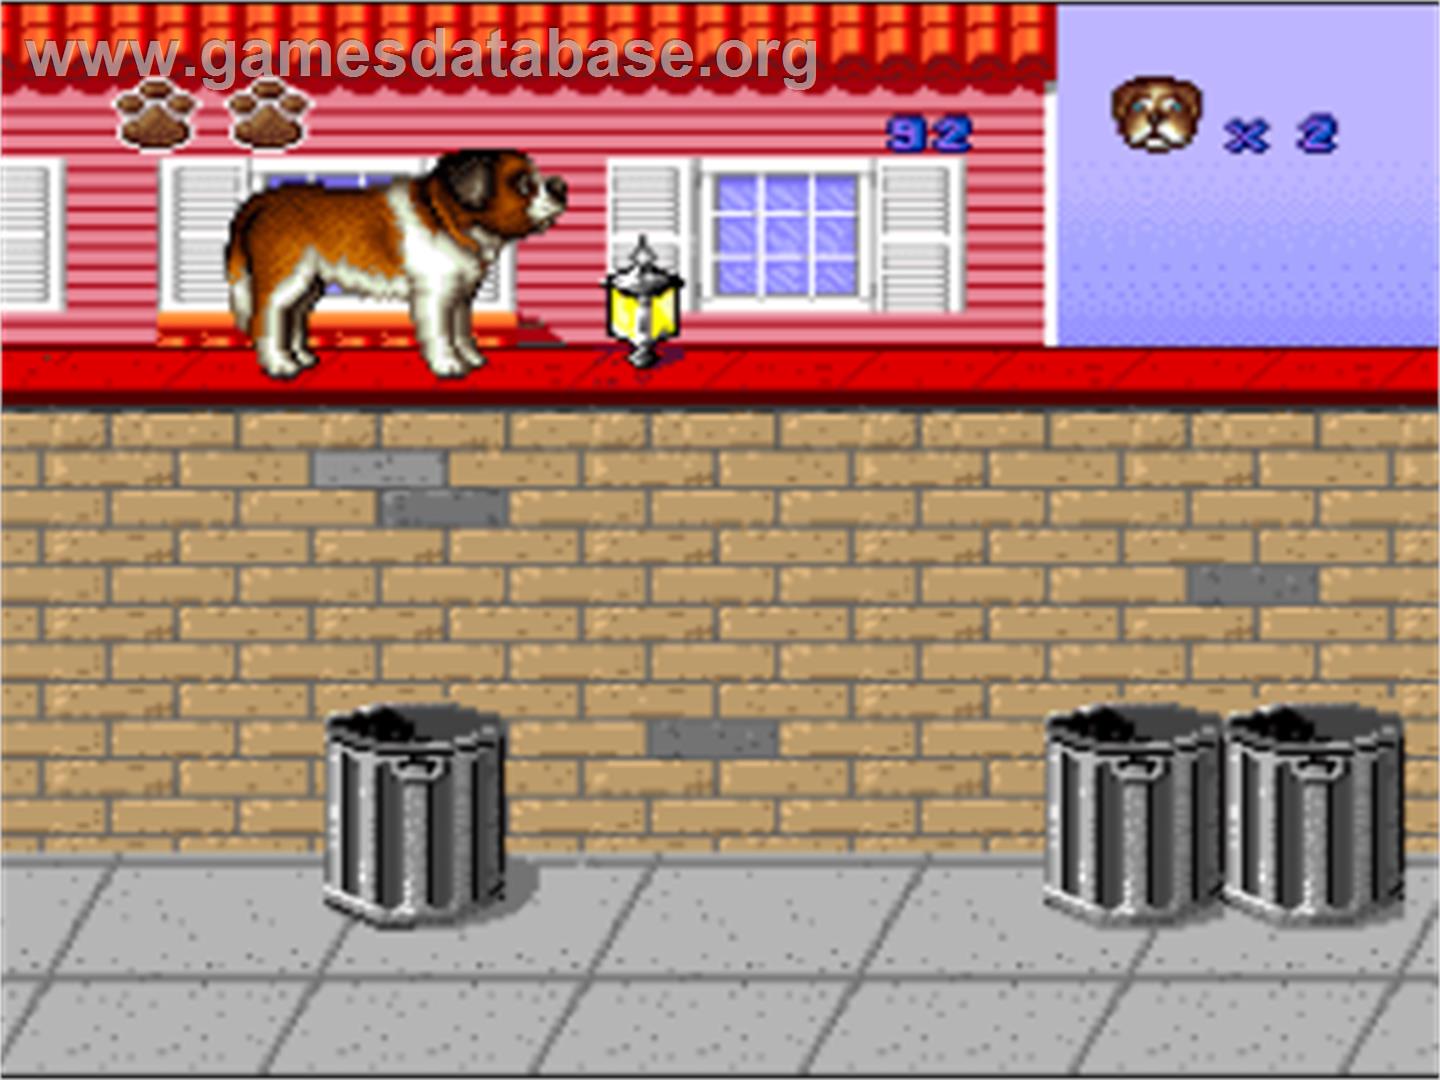 Beethoven's 2nd: The Ultimate Canine Caper! - Nintendo SNES - Artwork - In Game